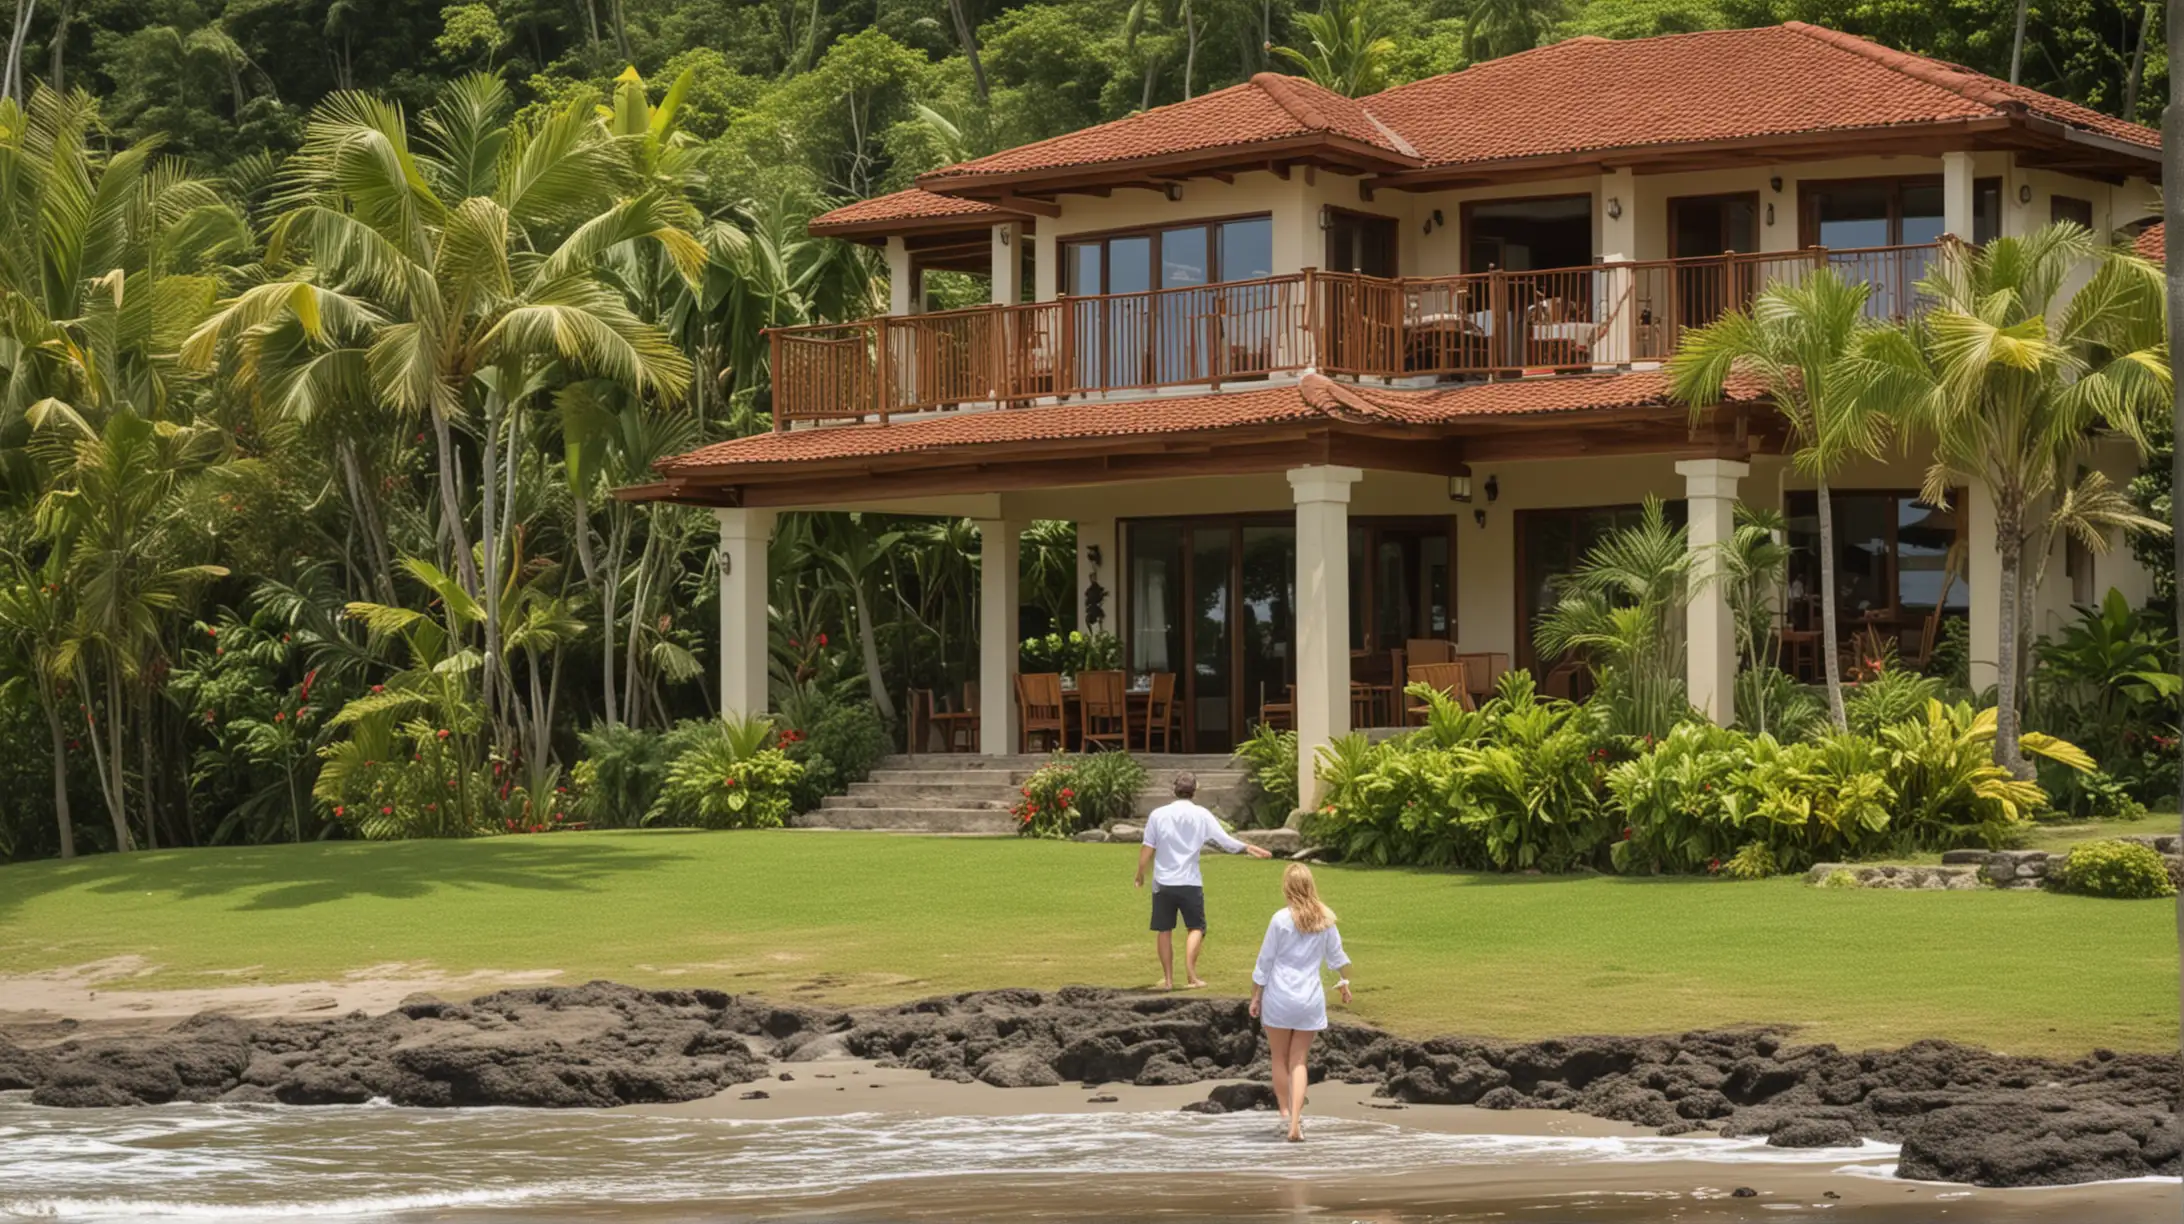 please provide a photo of a vacation home manager outside of a ocean front vacation home in costa rica greeting guests.

